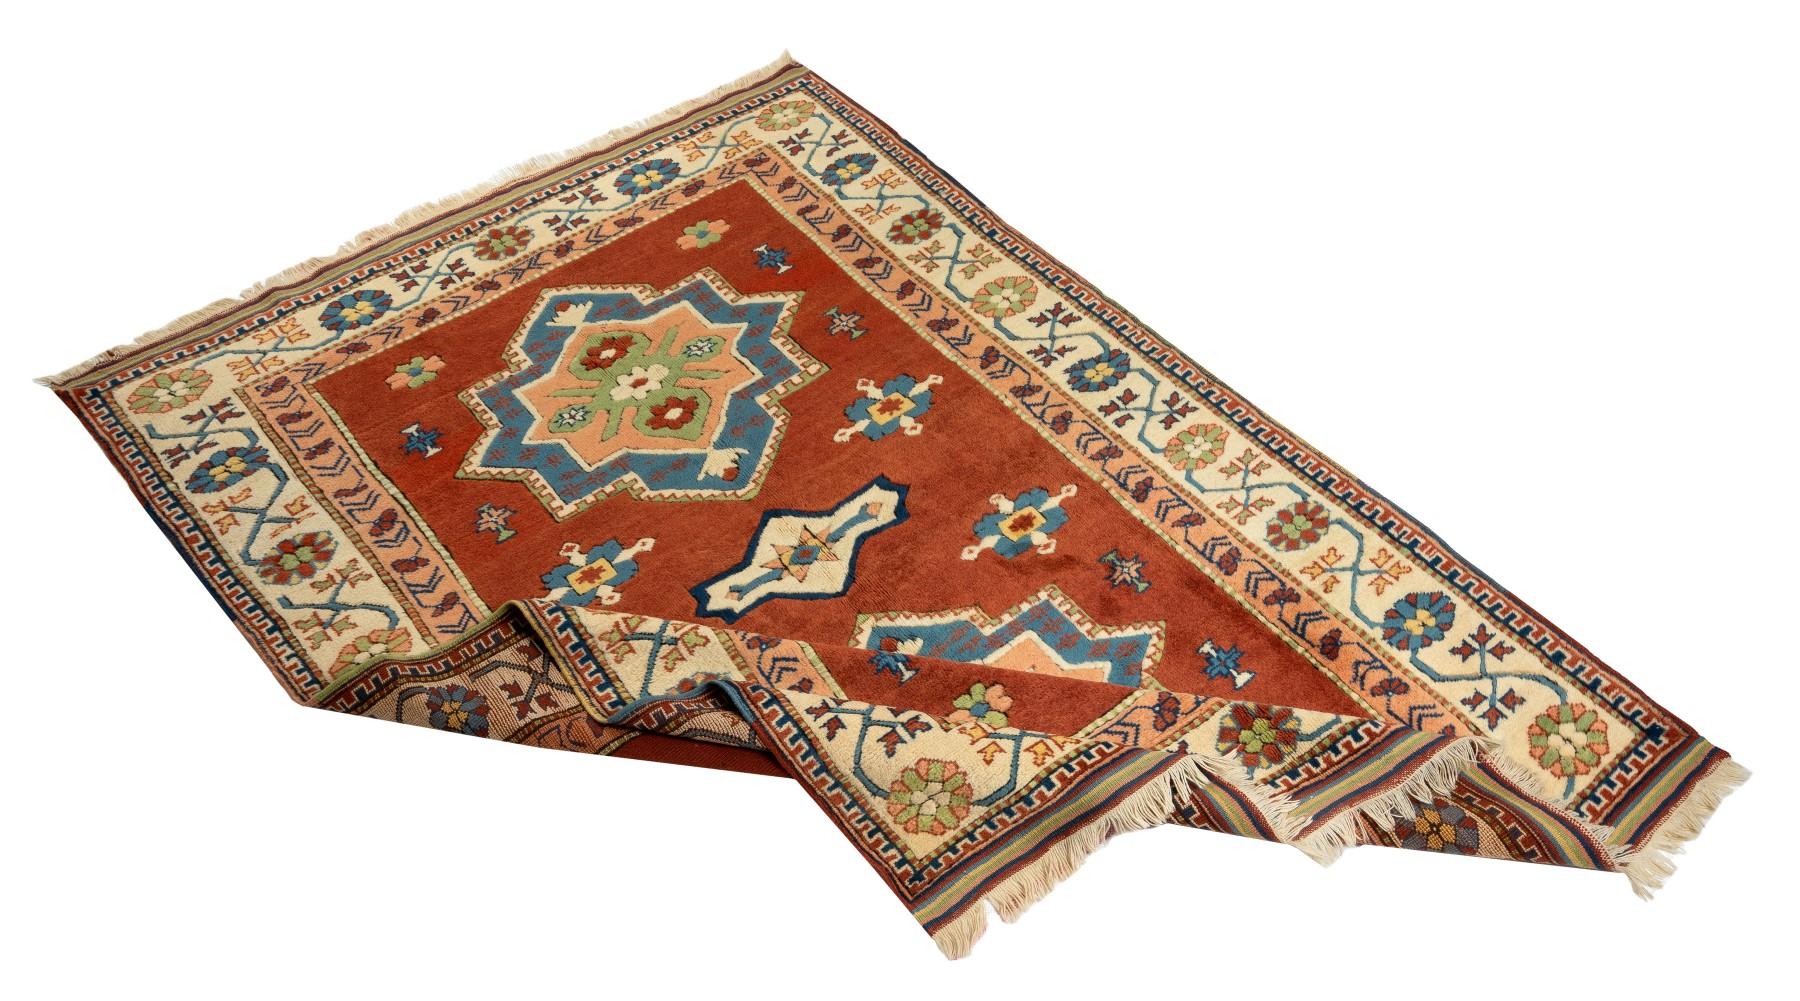 A new hand-knotted Turkish rug with excellent, lustrous, soft medium wool pile. The rug features two large geometrical medallions as well as several other smaller ones in bright cerulean blue, peach, ivory and celadon green floating across the field